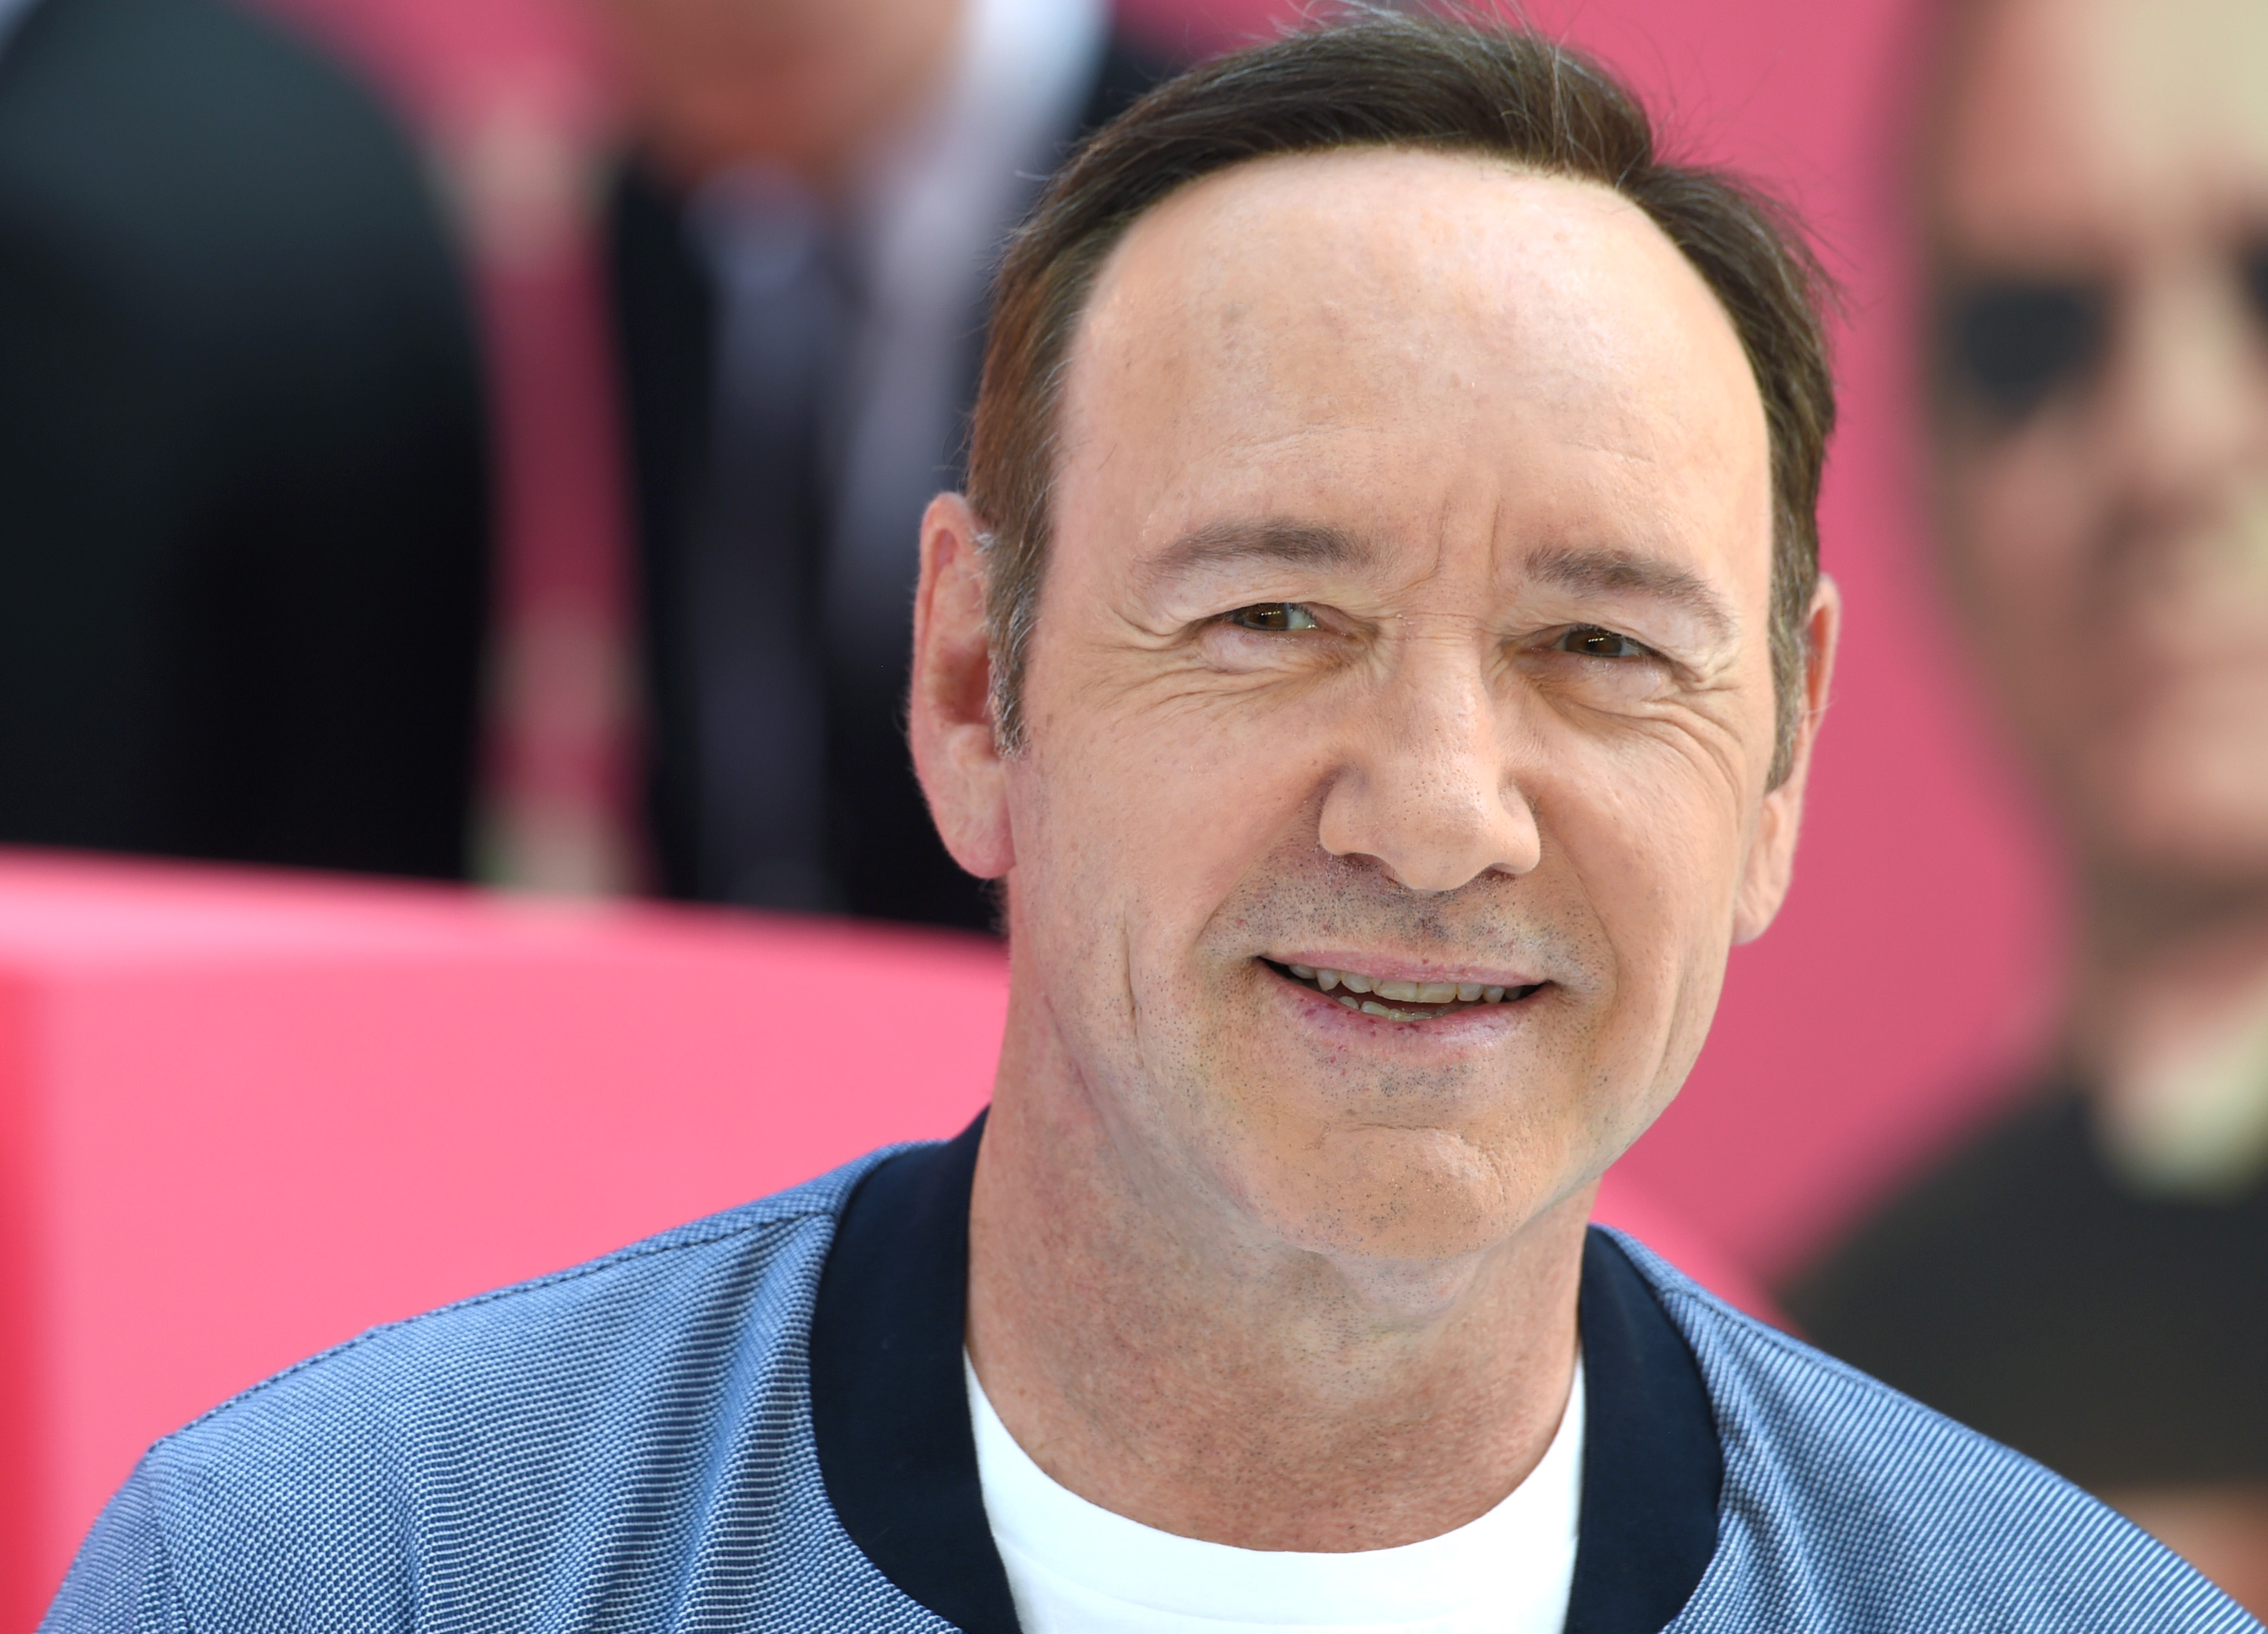 Kevin Spacey attends the European premiere of "Baby Driver" on June 21, 2017, in London, United Kingdom. | Source: Getty Images